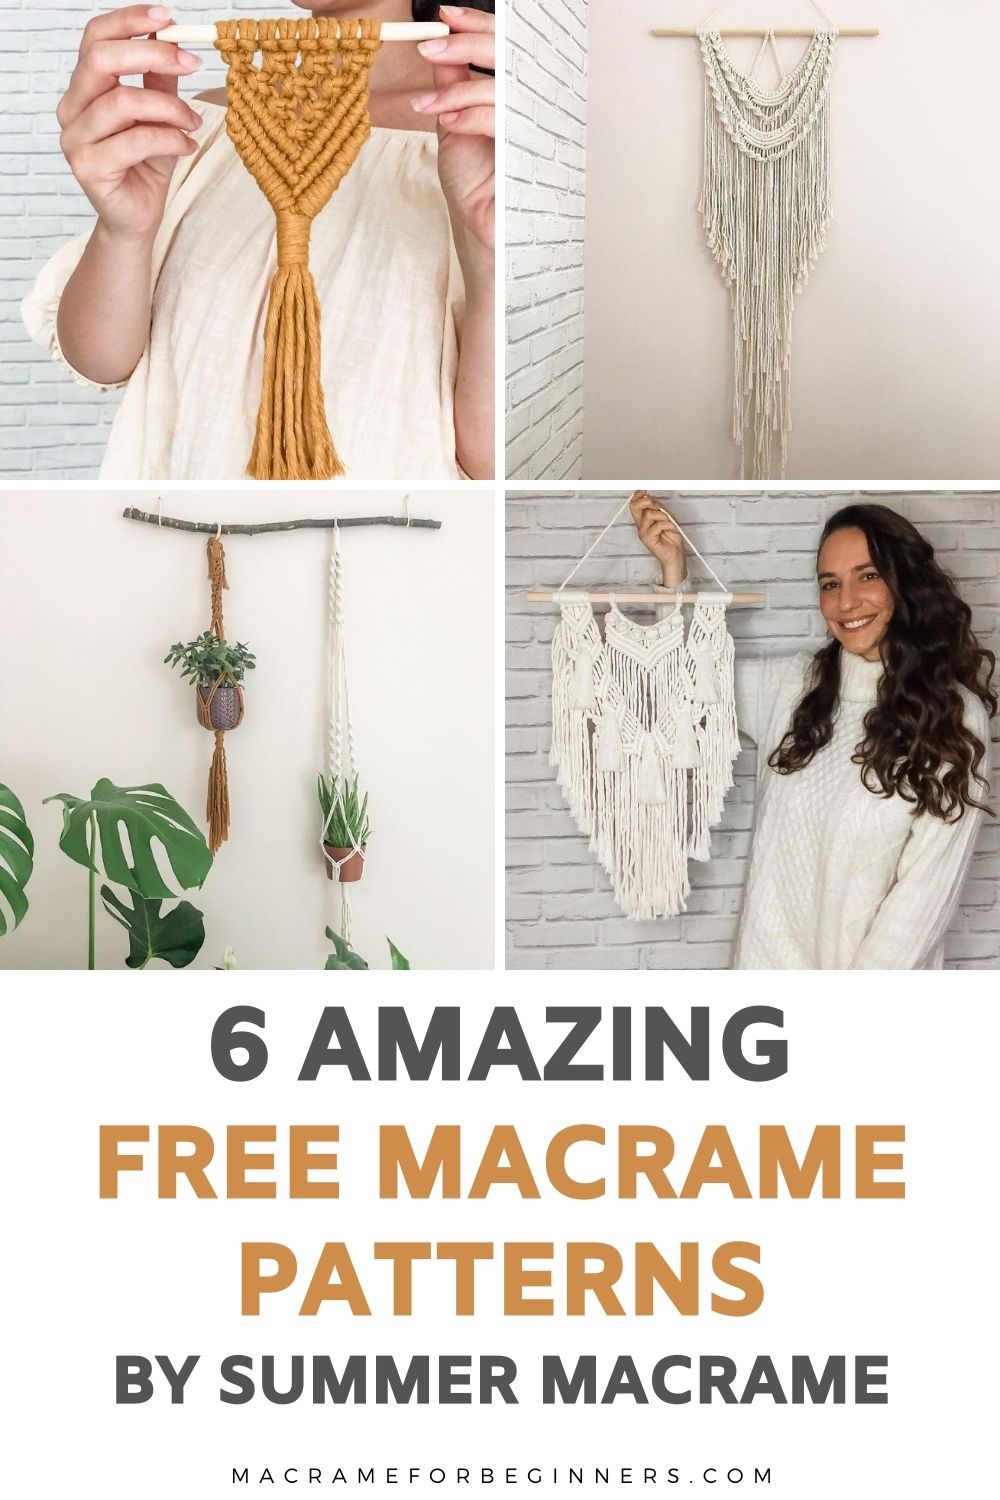 Interview + Make Your Own Home Decor with Teacher Saskia from Summer Macrame - Macrame for Beginners 